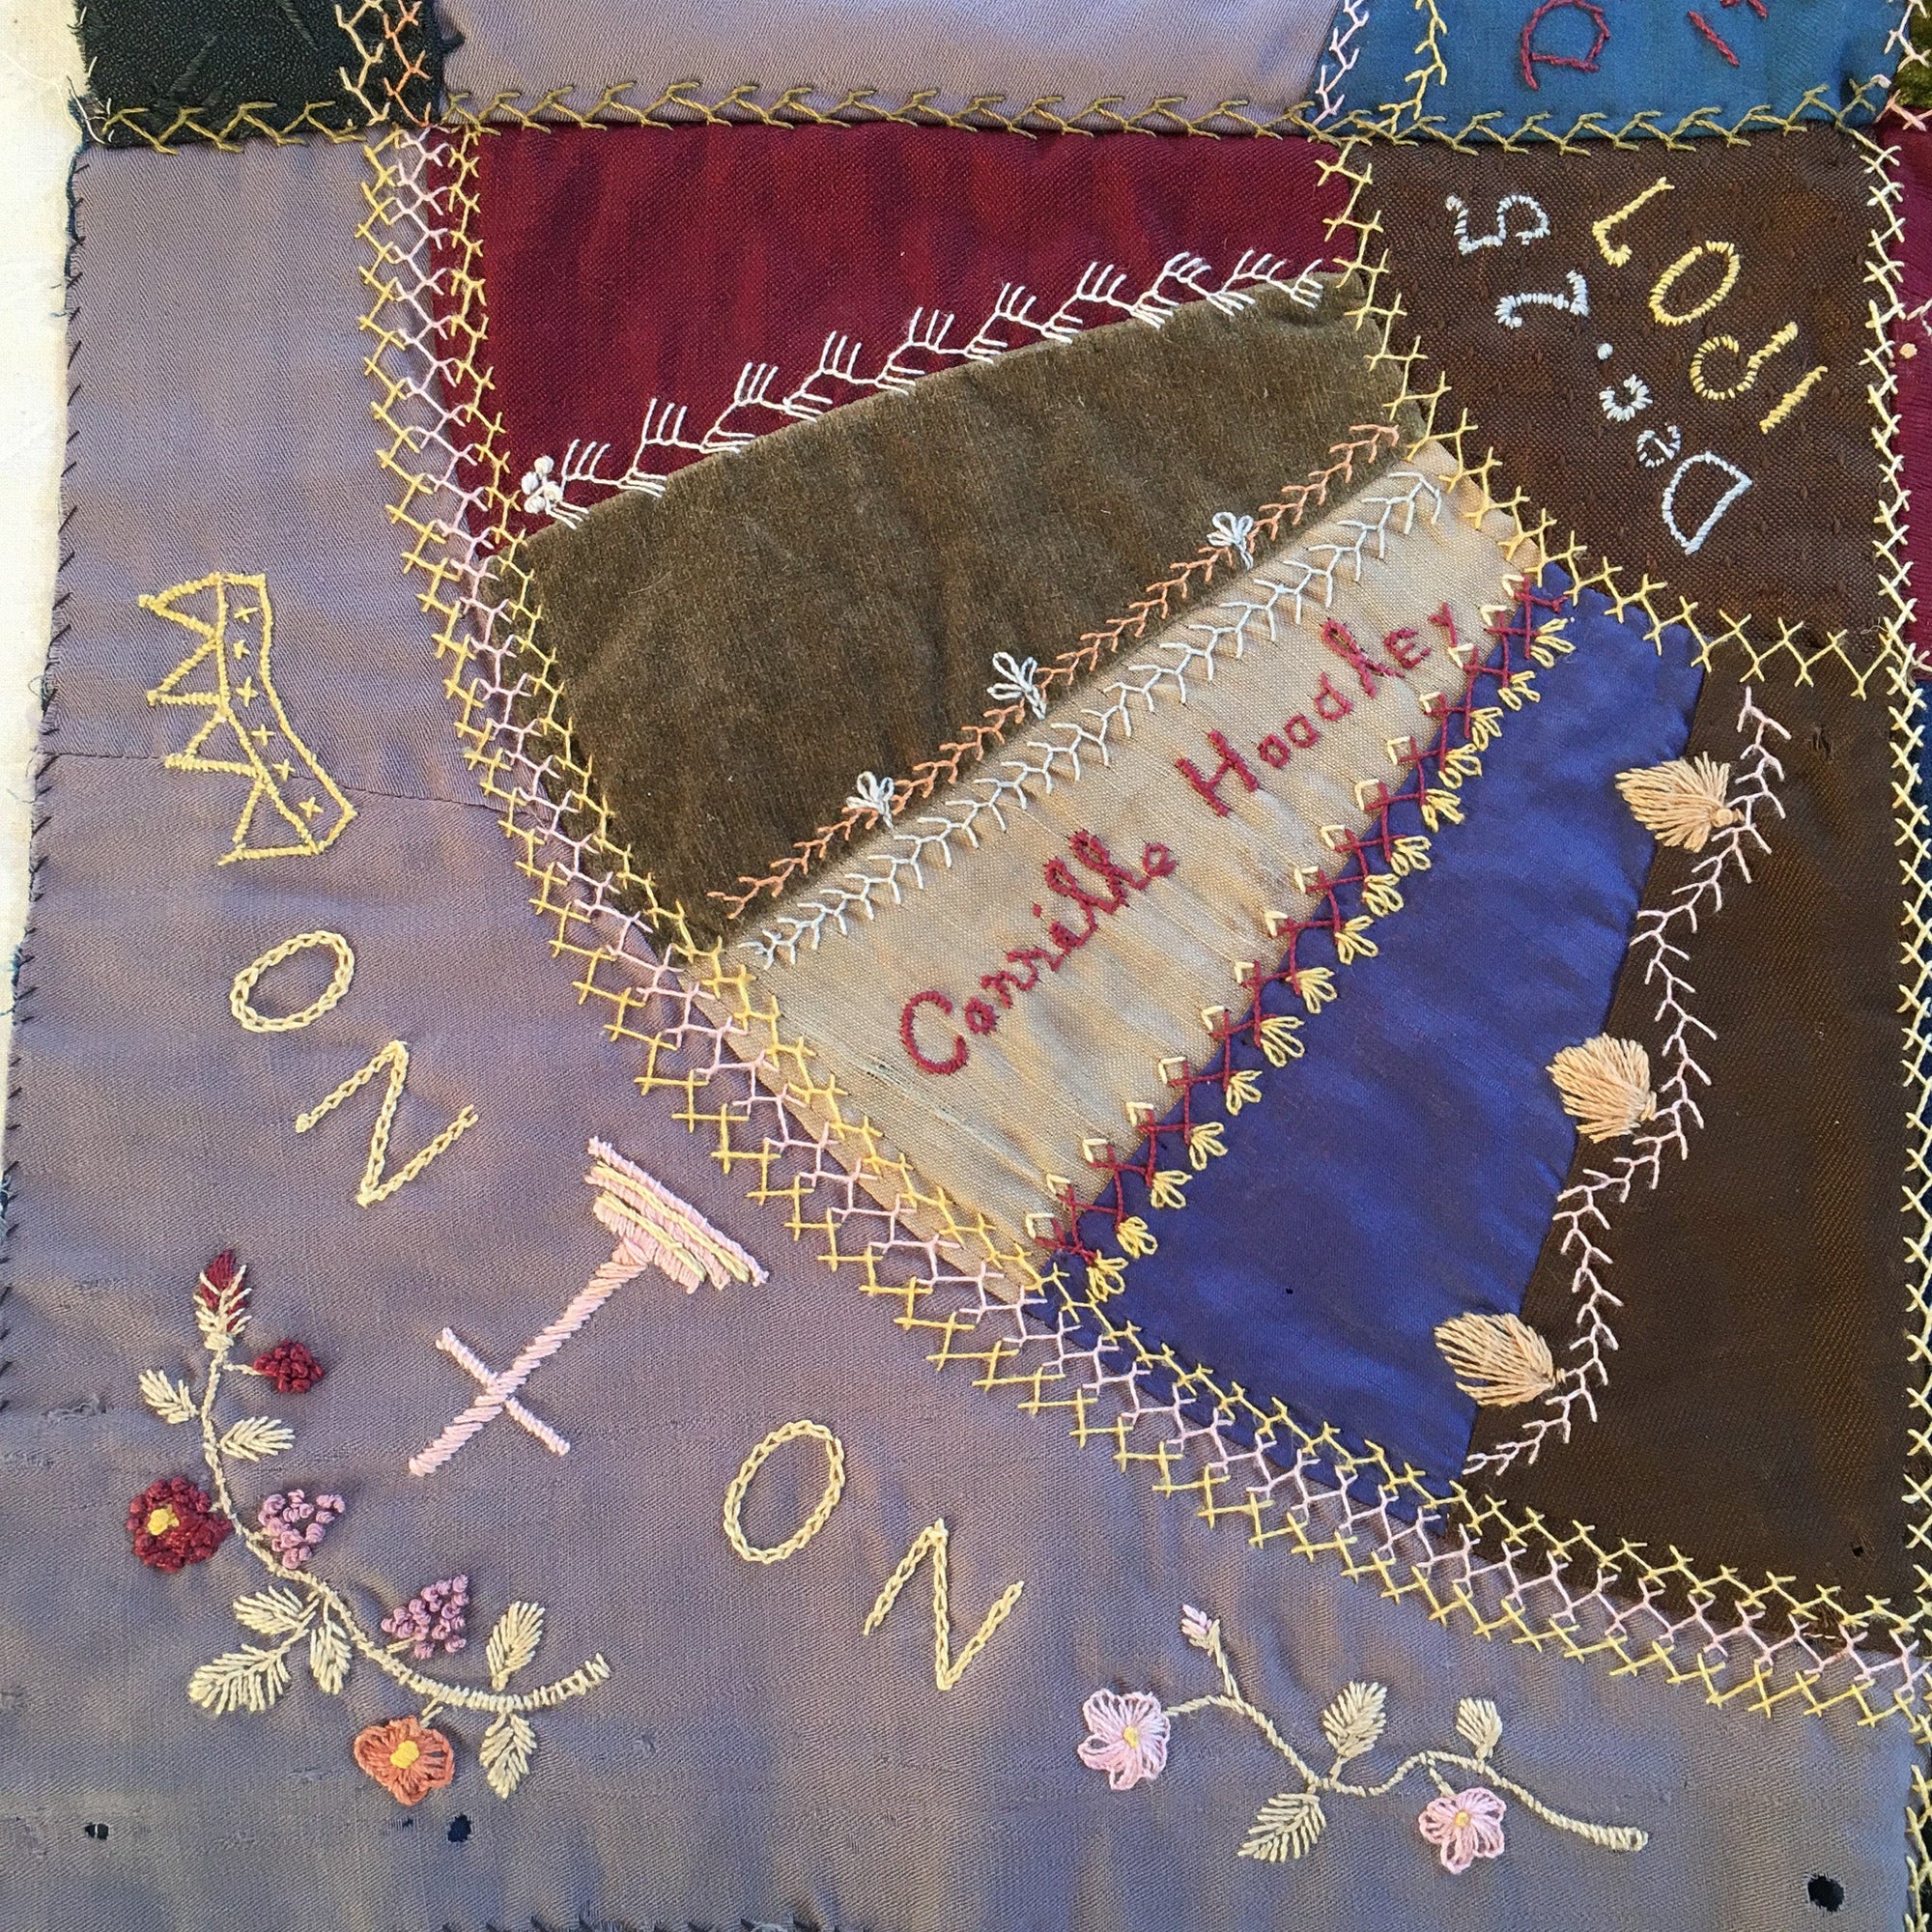 1907 Signed Quilt Square, Handstitched and Embroidered